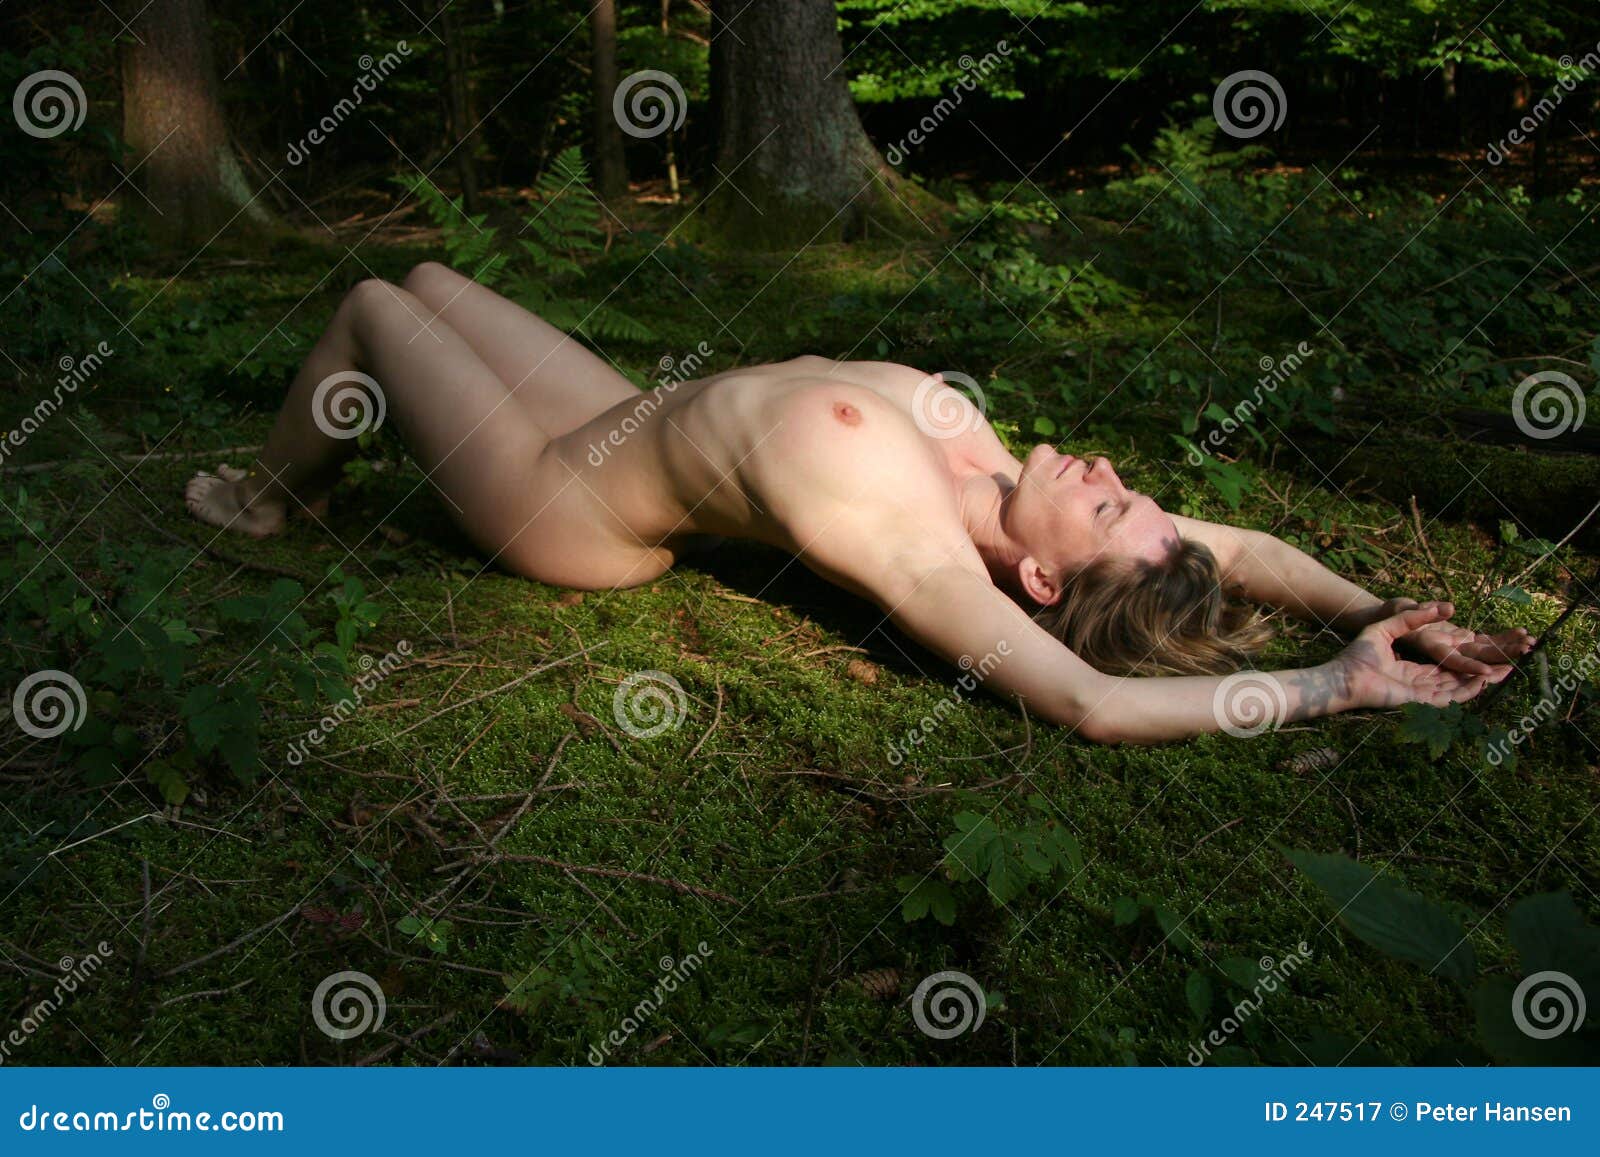 The forest nude